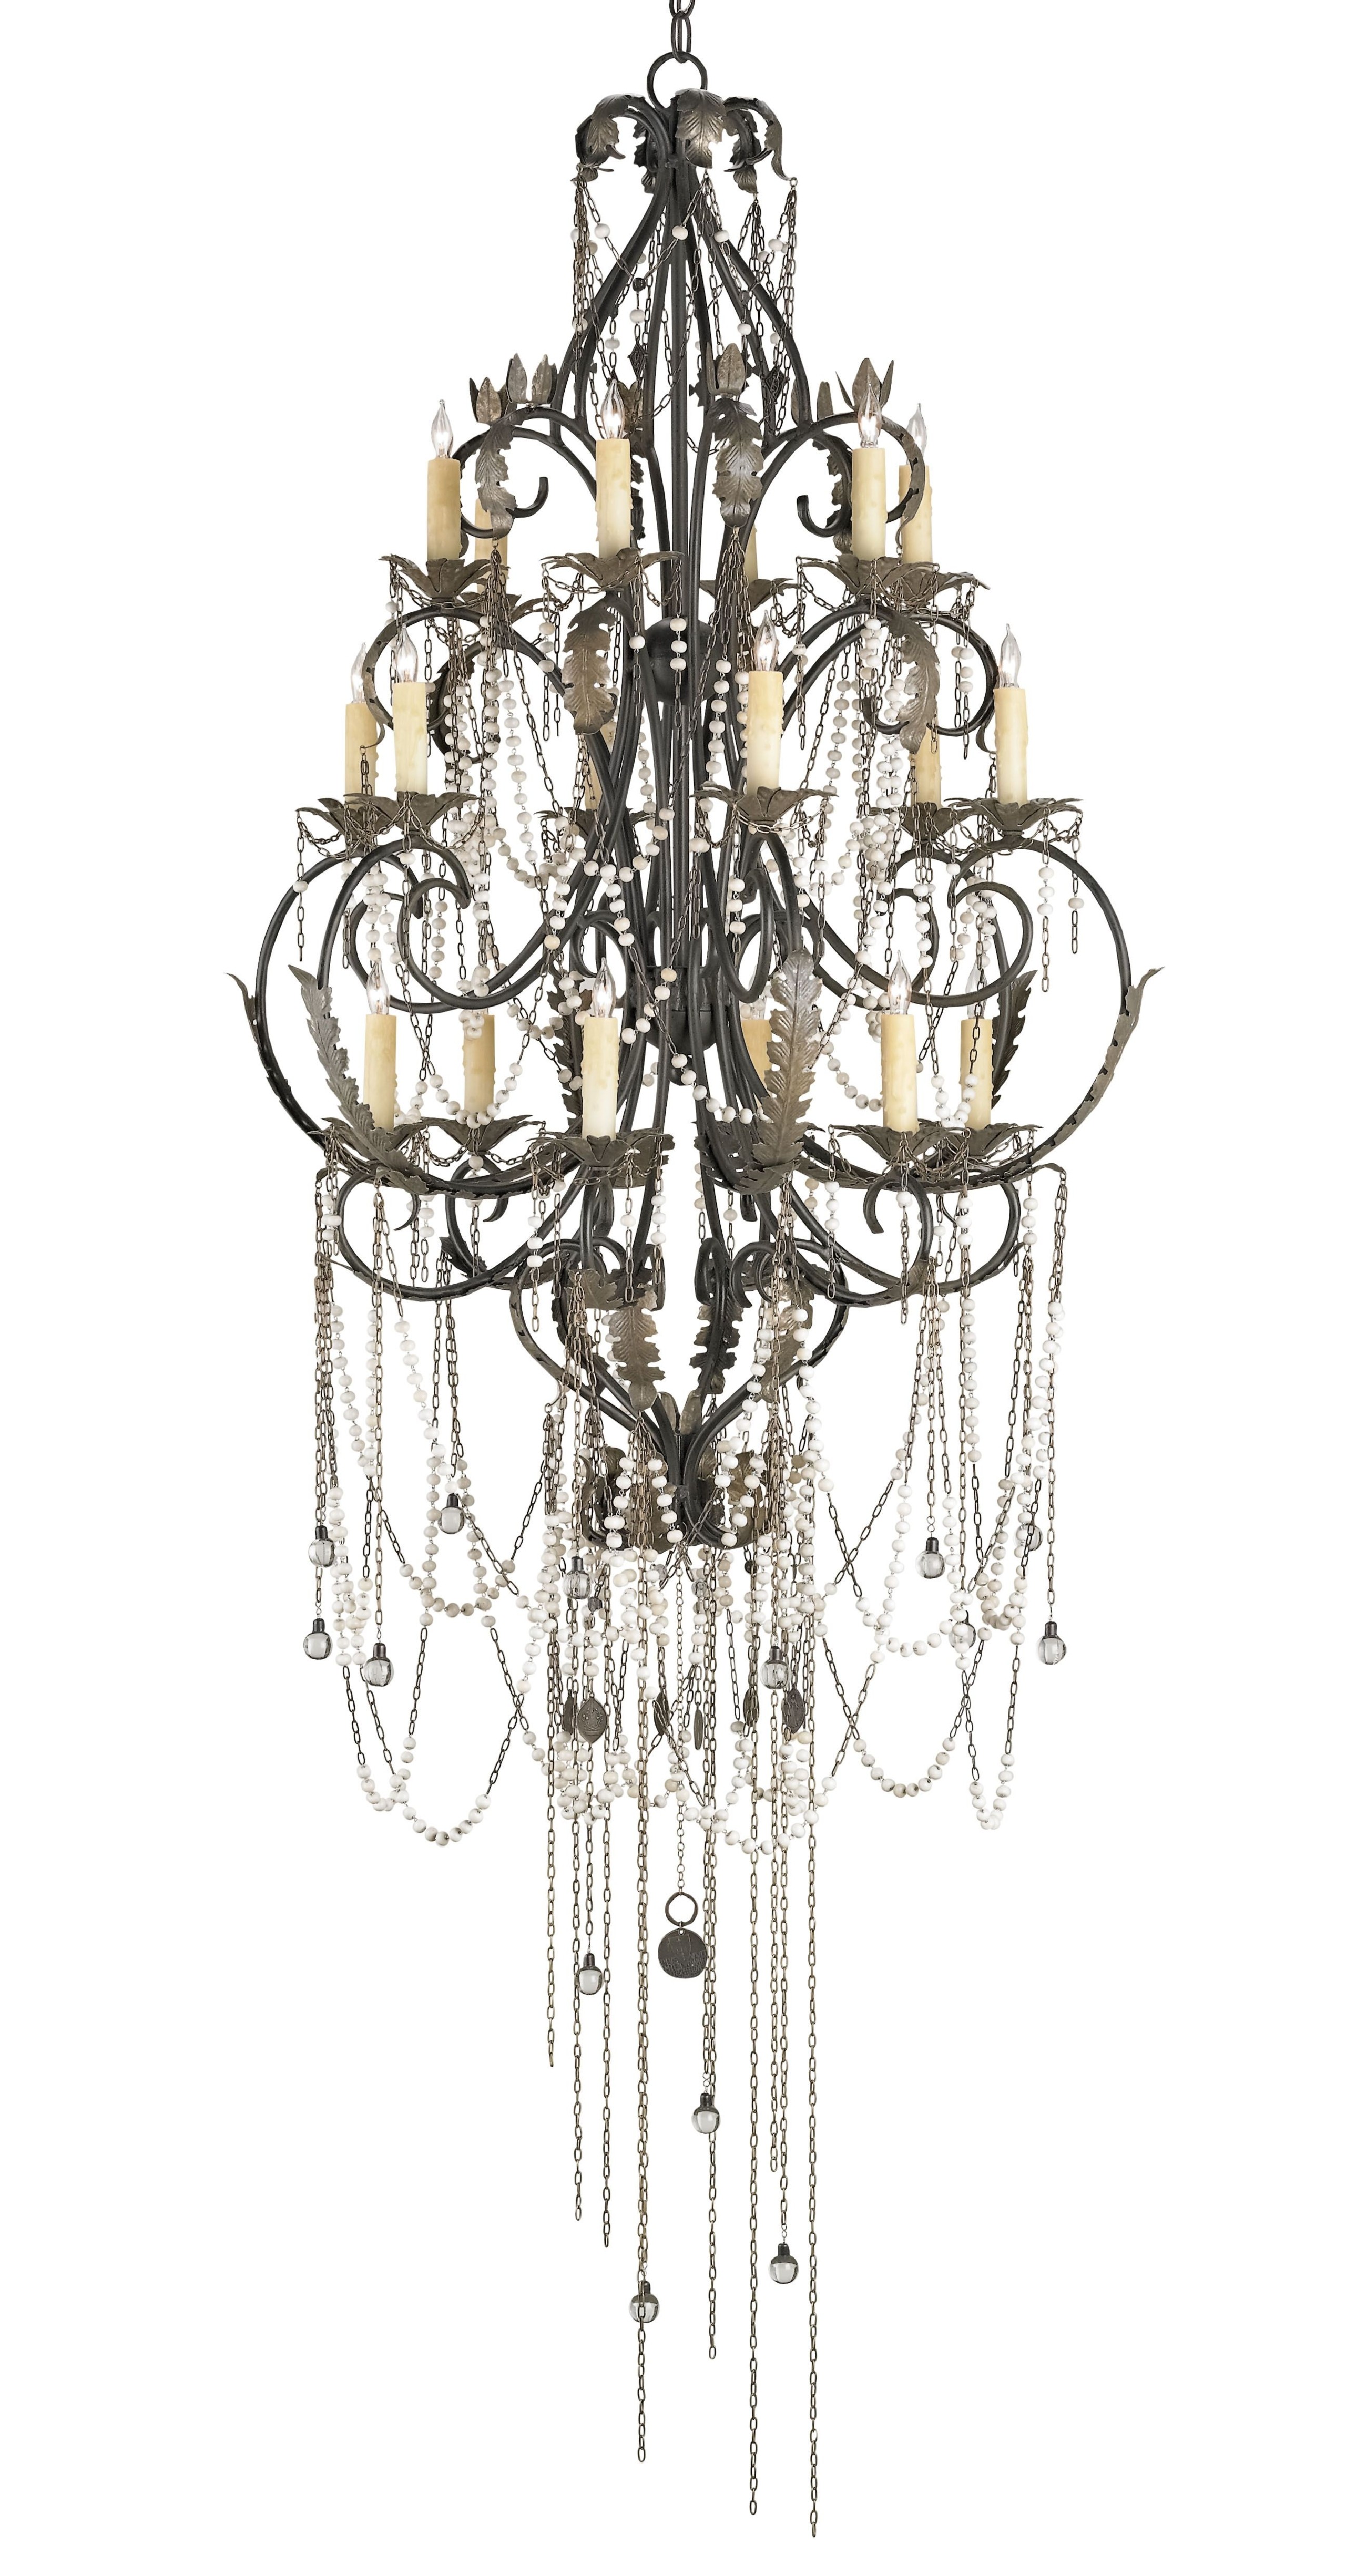 Antiquity chandelier large by curry and company the shannon koszyk